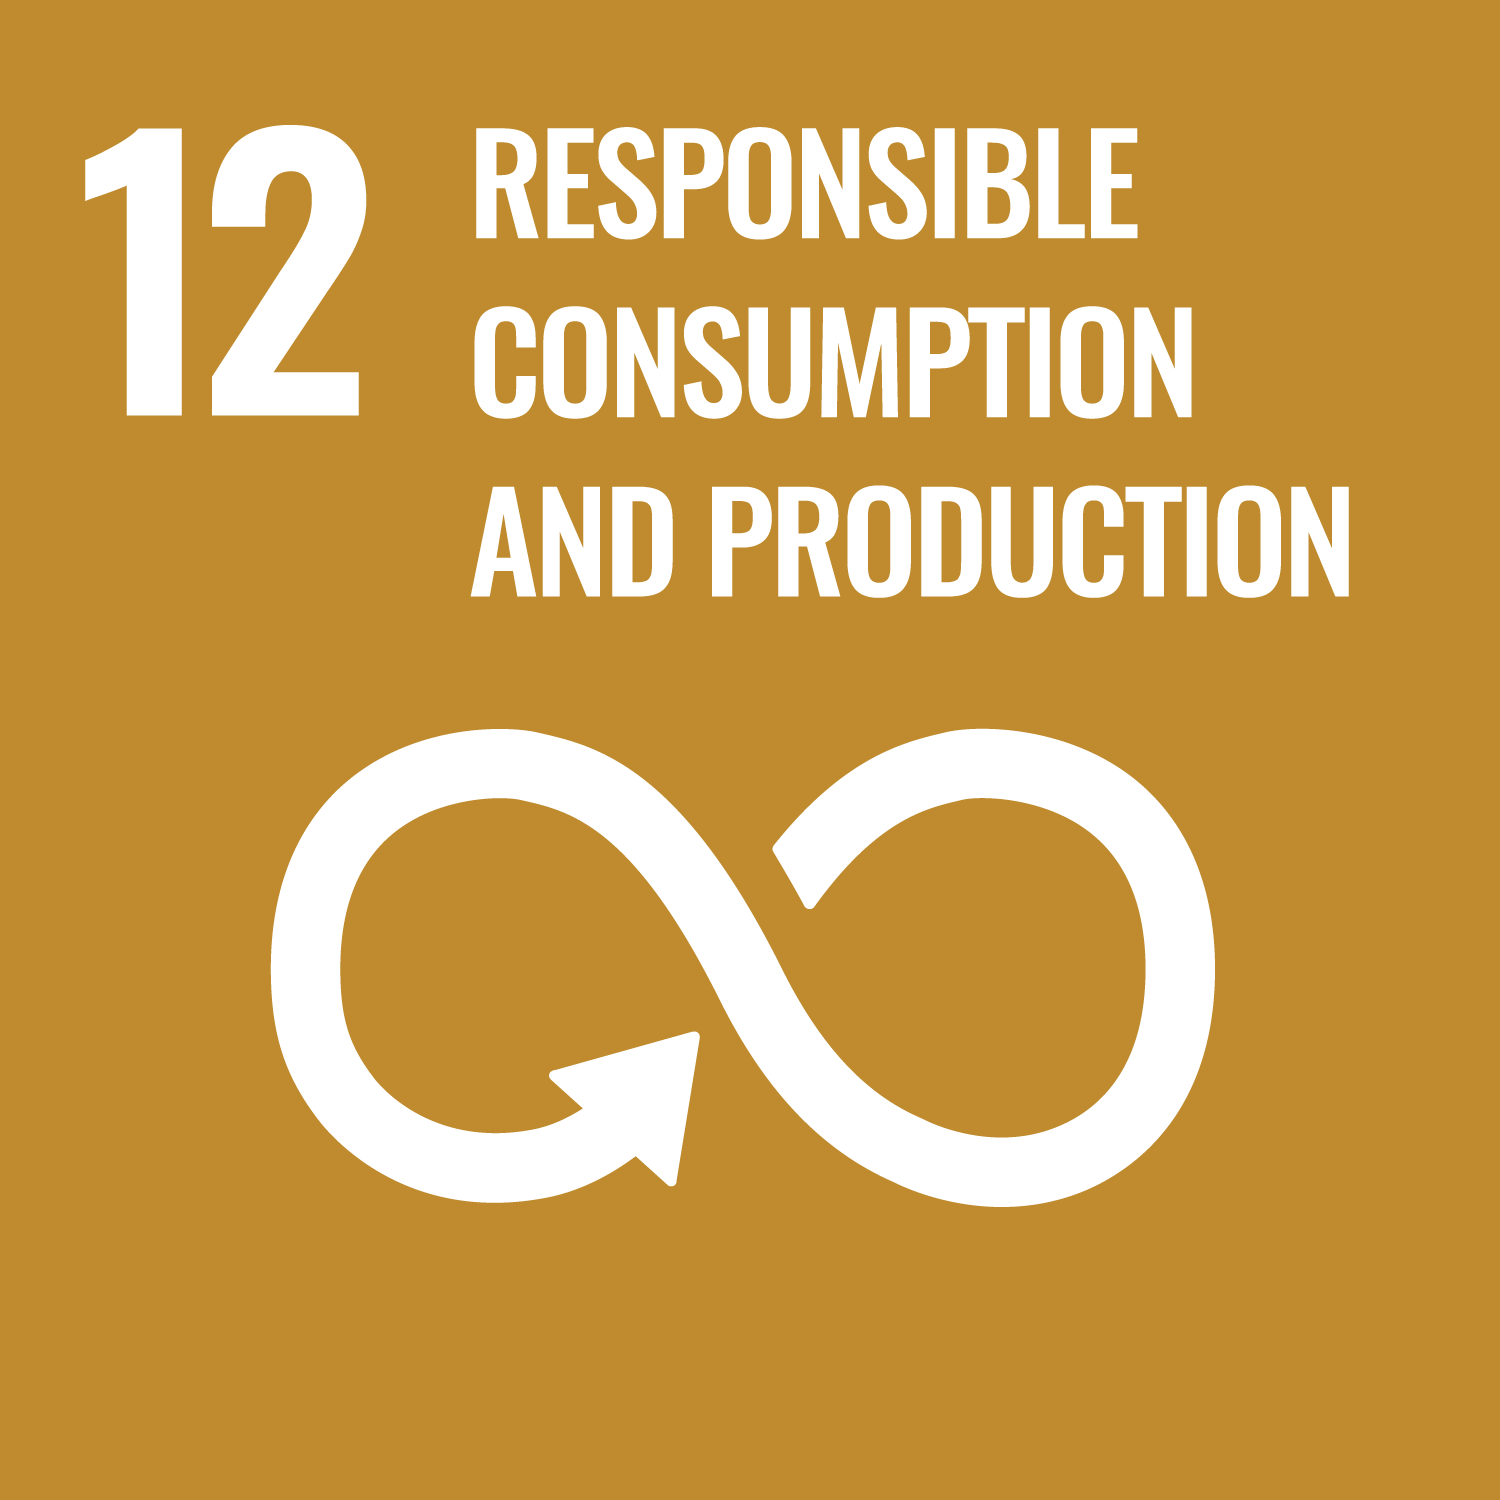 responsible-consumption-and-production-sustainability-goal